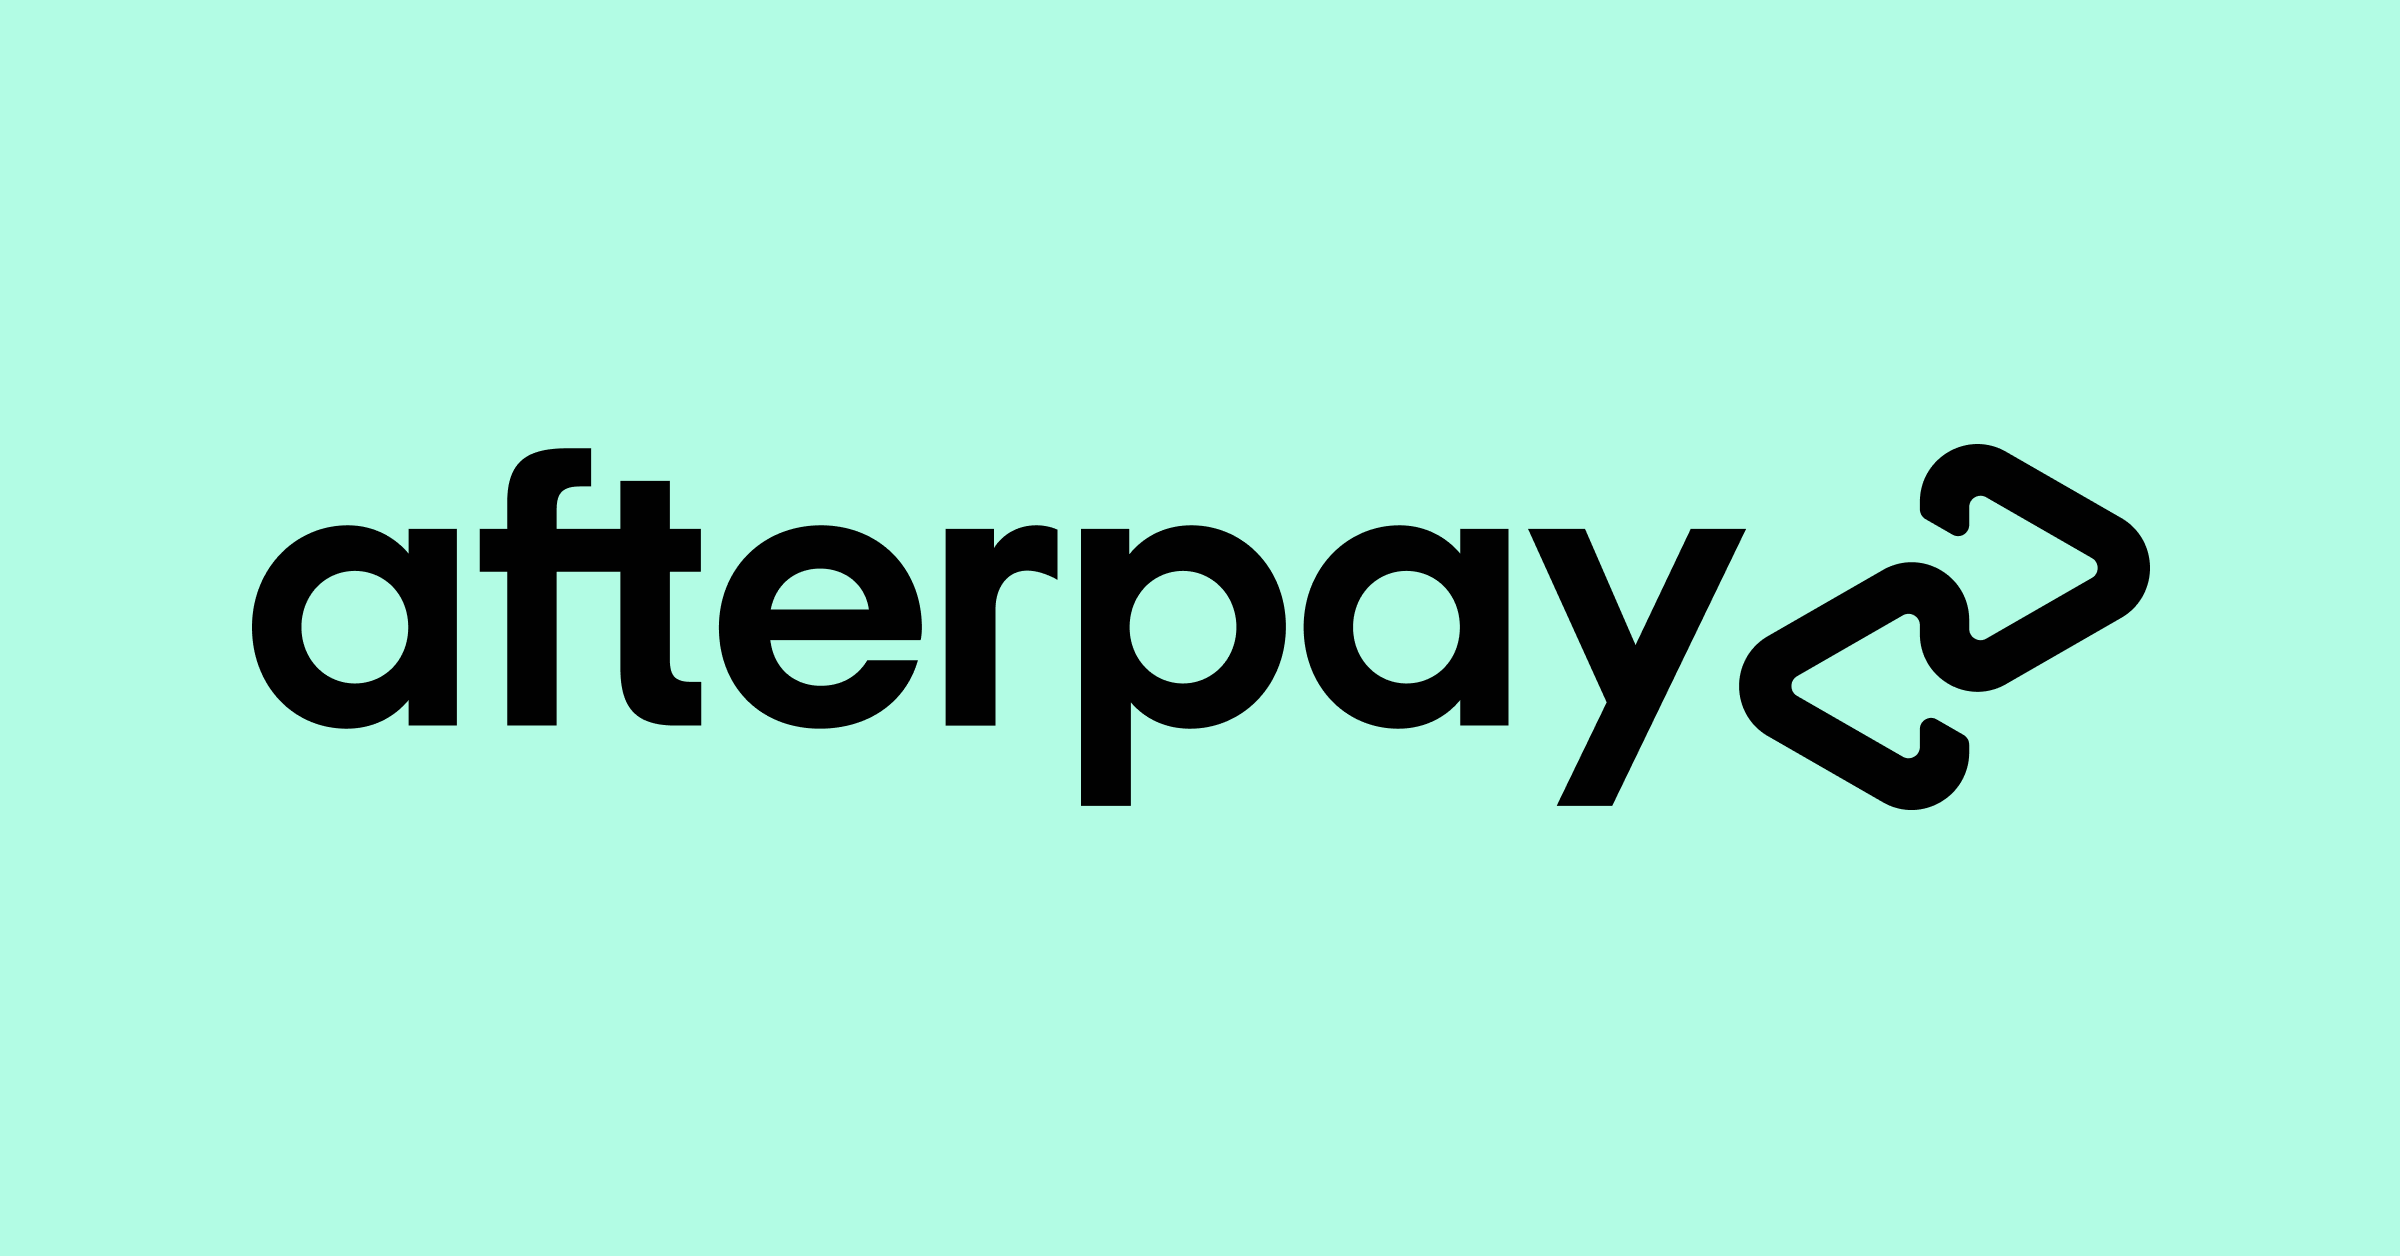 Afterpay & Clearpay